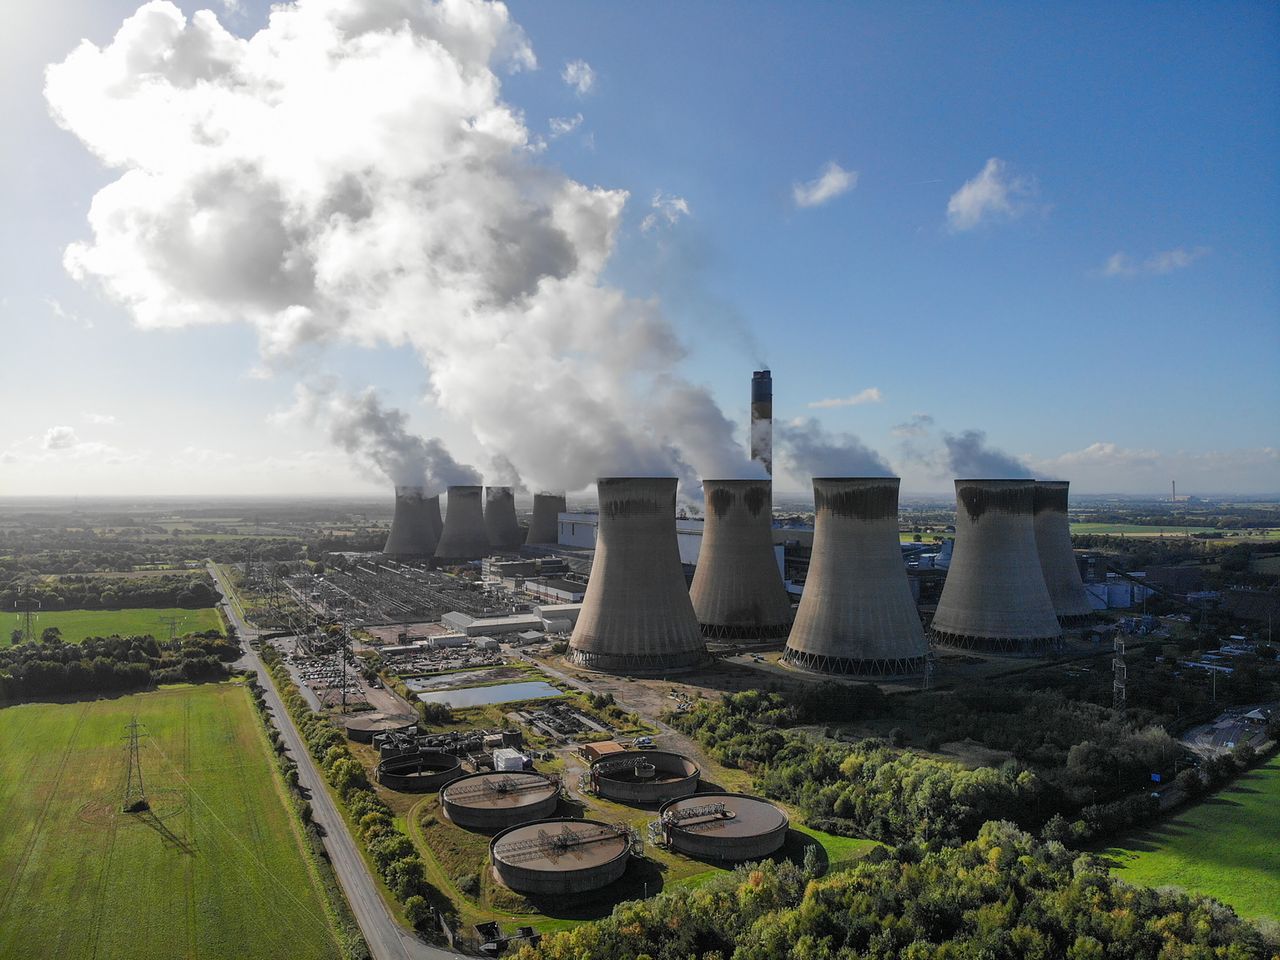 Aerial view of Drax Power Station, the third-most polluting power station in Europe, located close to Selby, North Yorkshire, England.